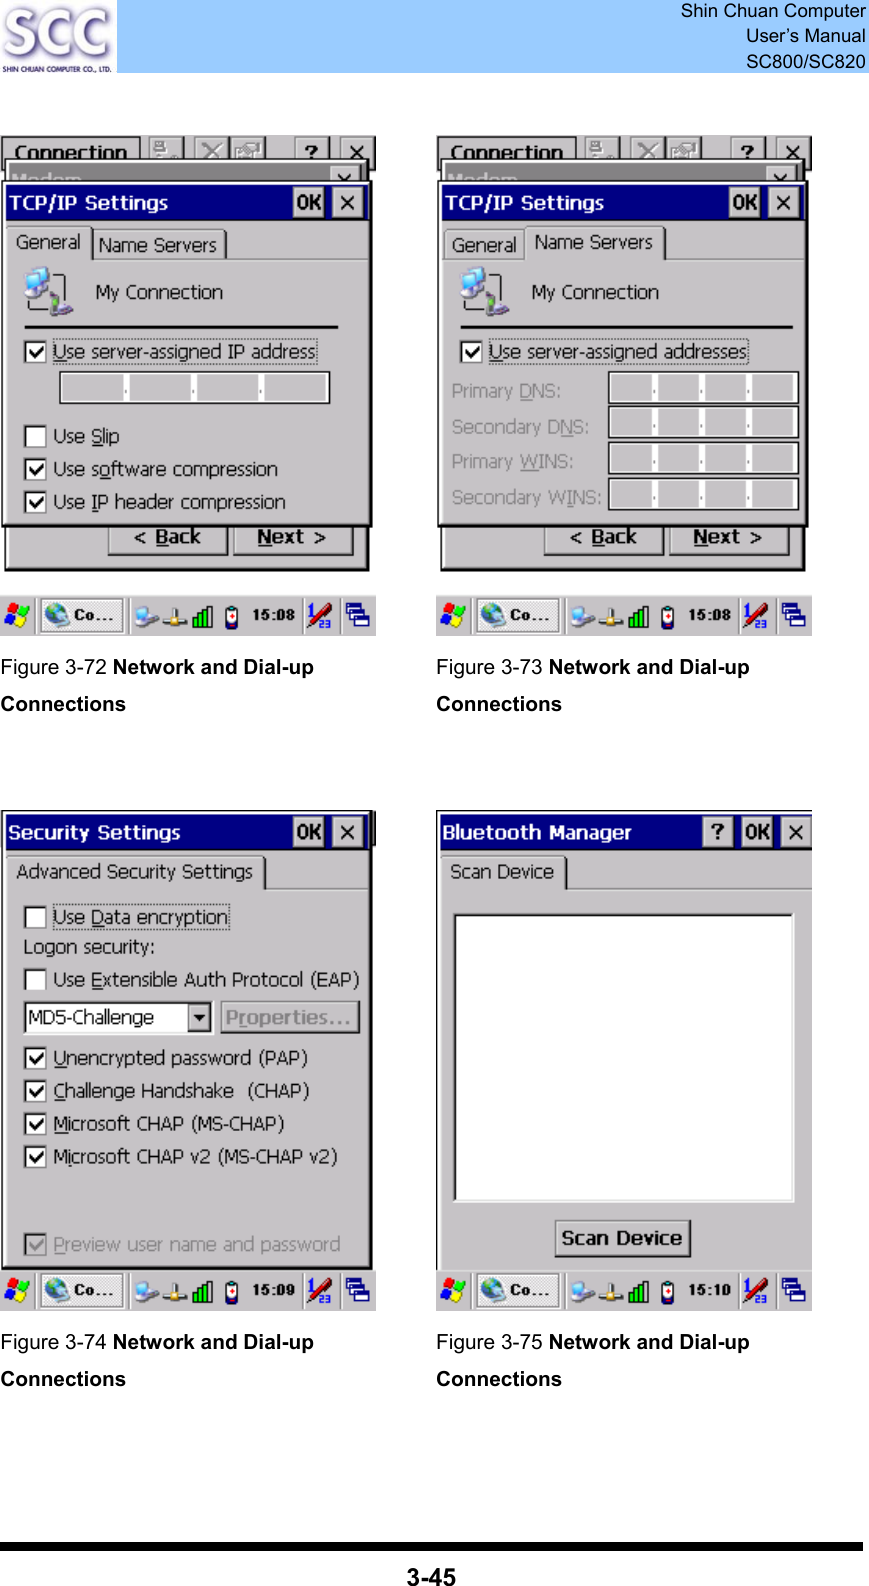  Shin Chuan Computer User’s Manual SC800/SC820  3-45     Figure 3-72 Network and Dial-up Connections   Figure 3-73 Network and Dial-up Connections    Figure 3-74 Network and Dial-up Connections    Figure 3-75 Network and Dial-up Connections 